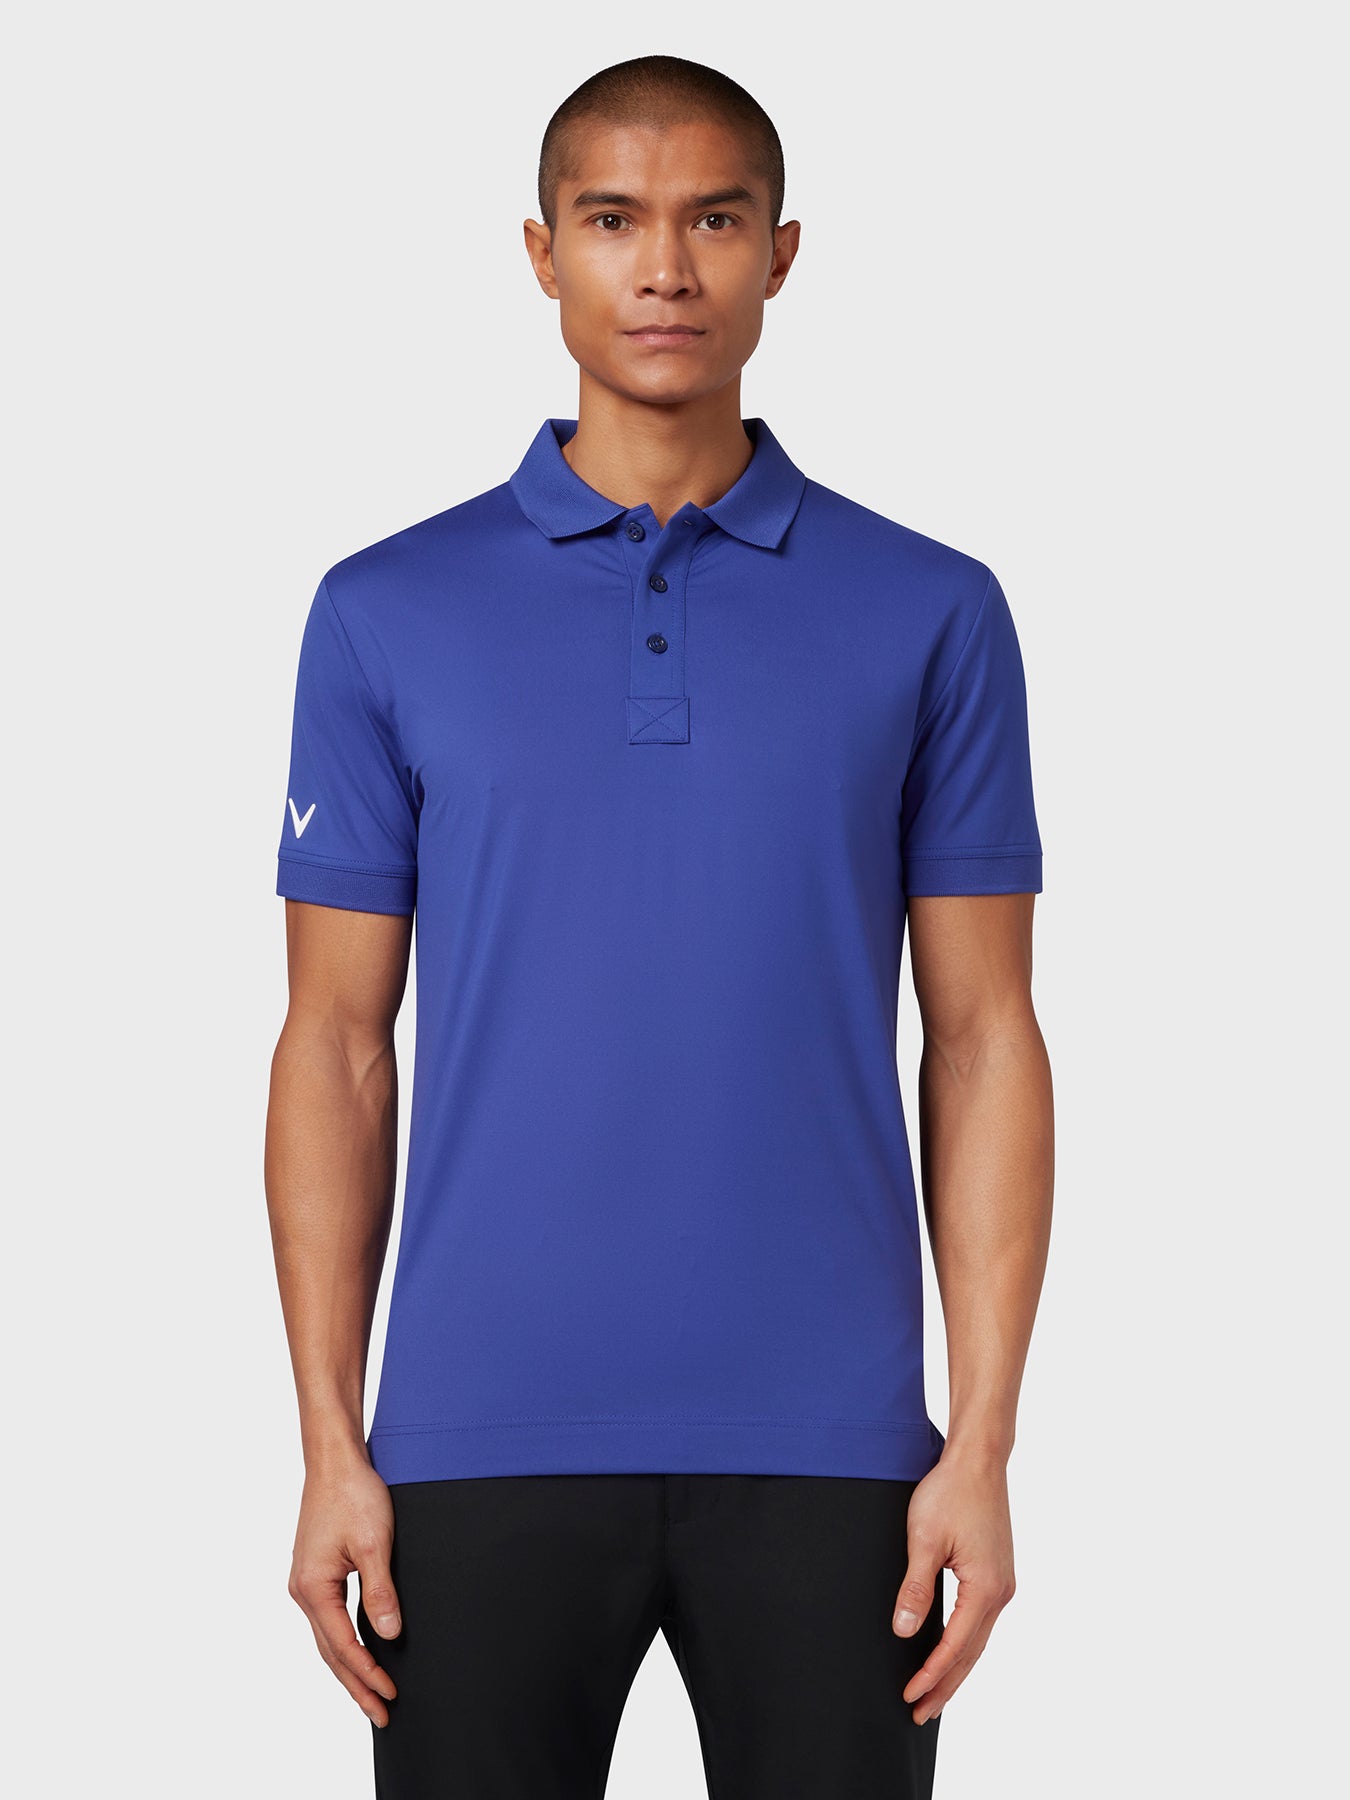 View X Series Solid Ribbed Polo In Clematis Blue Clematis Blue S information